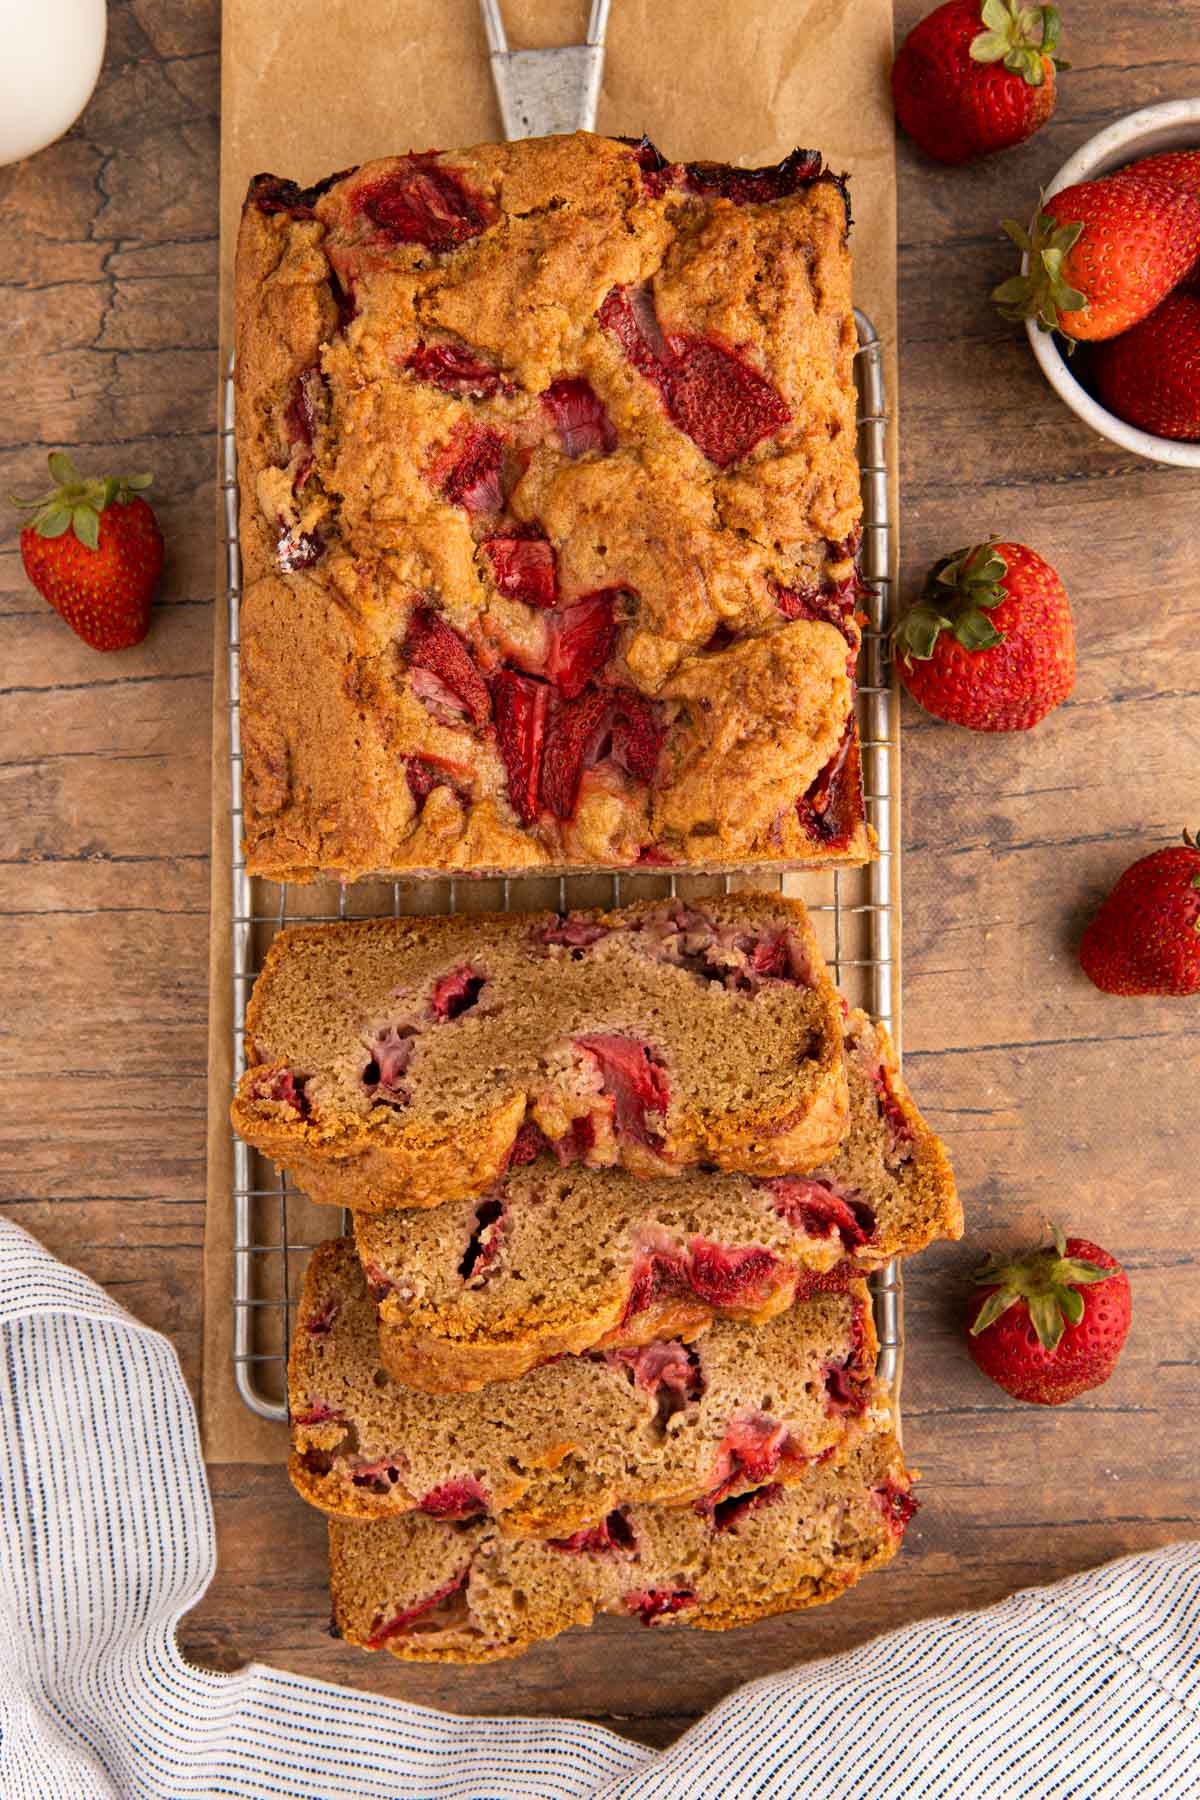 Strawberry Bread loaf half sliced and half whole on wire rack with berries scattered around